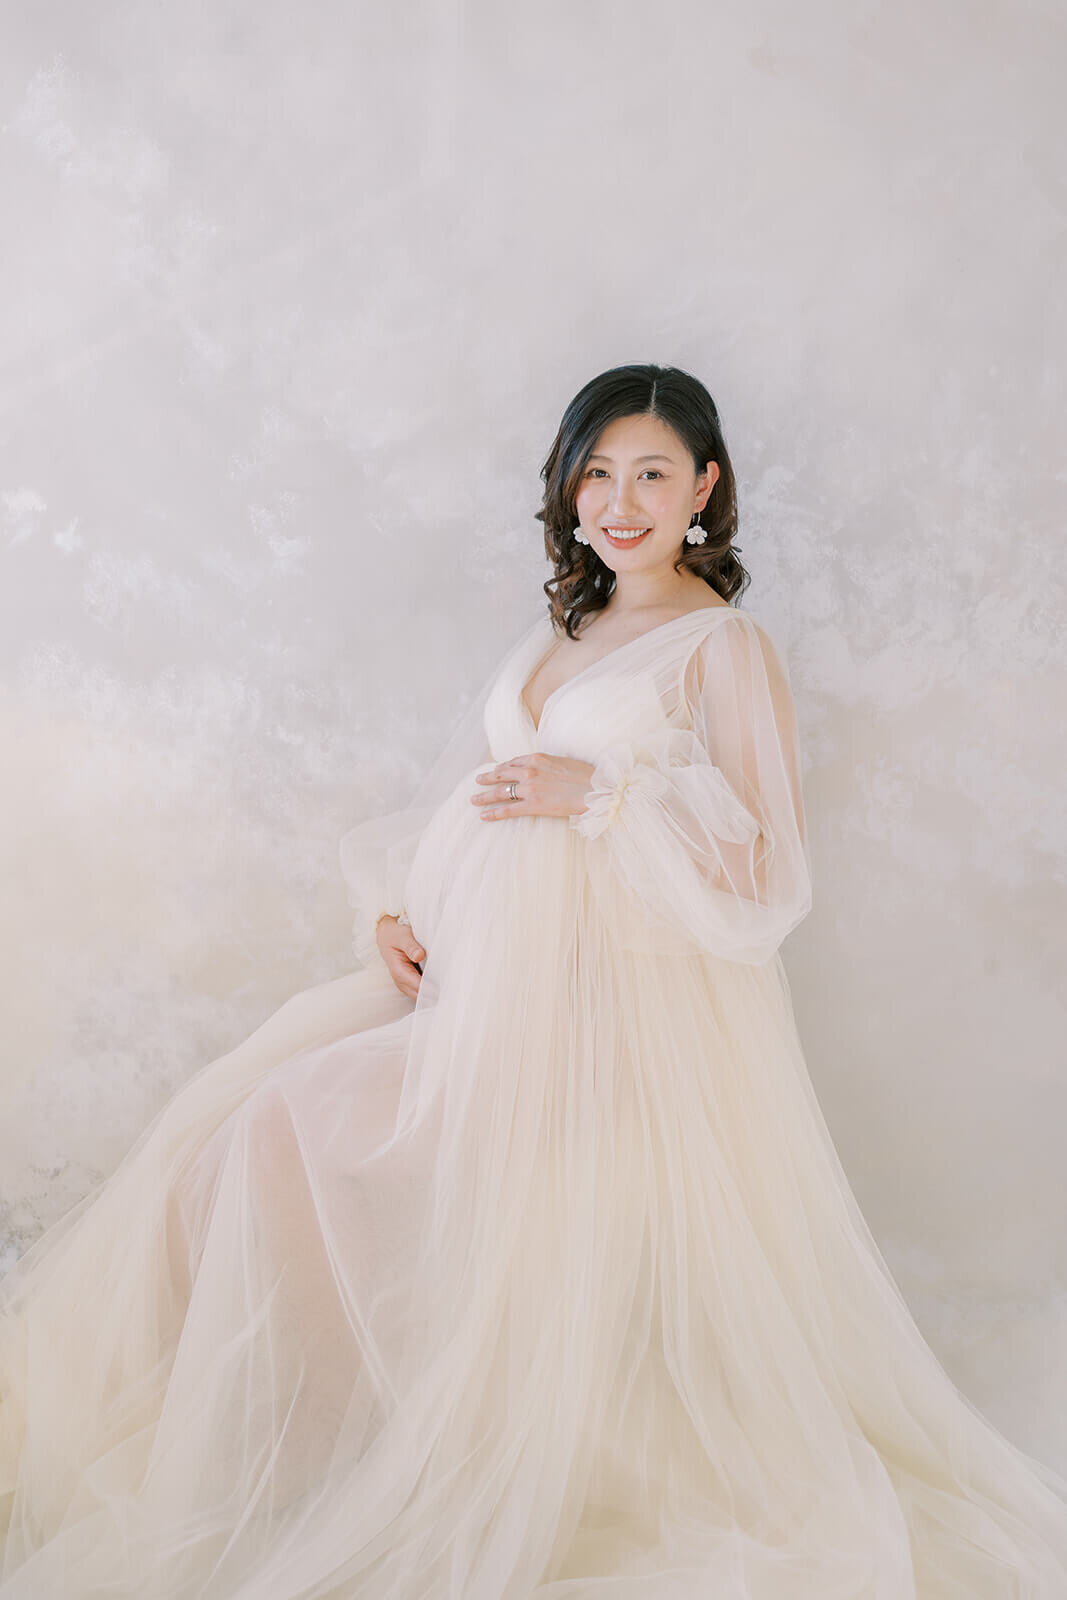 MATERNITY DRESS HIRE “A mother's joy begins when new life is